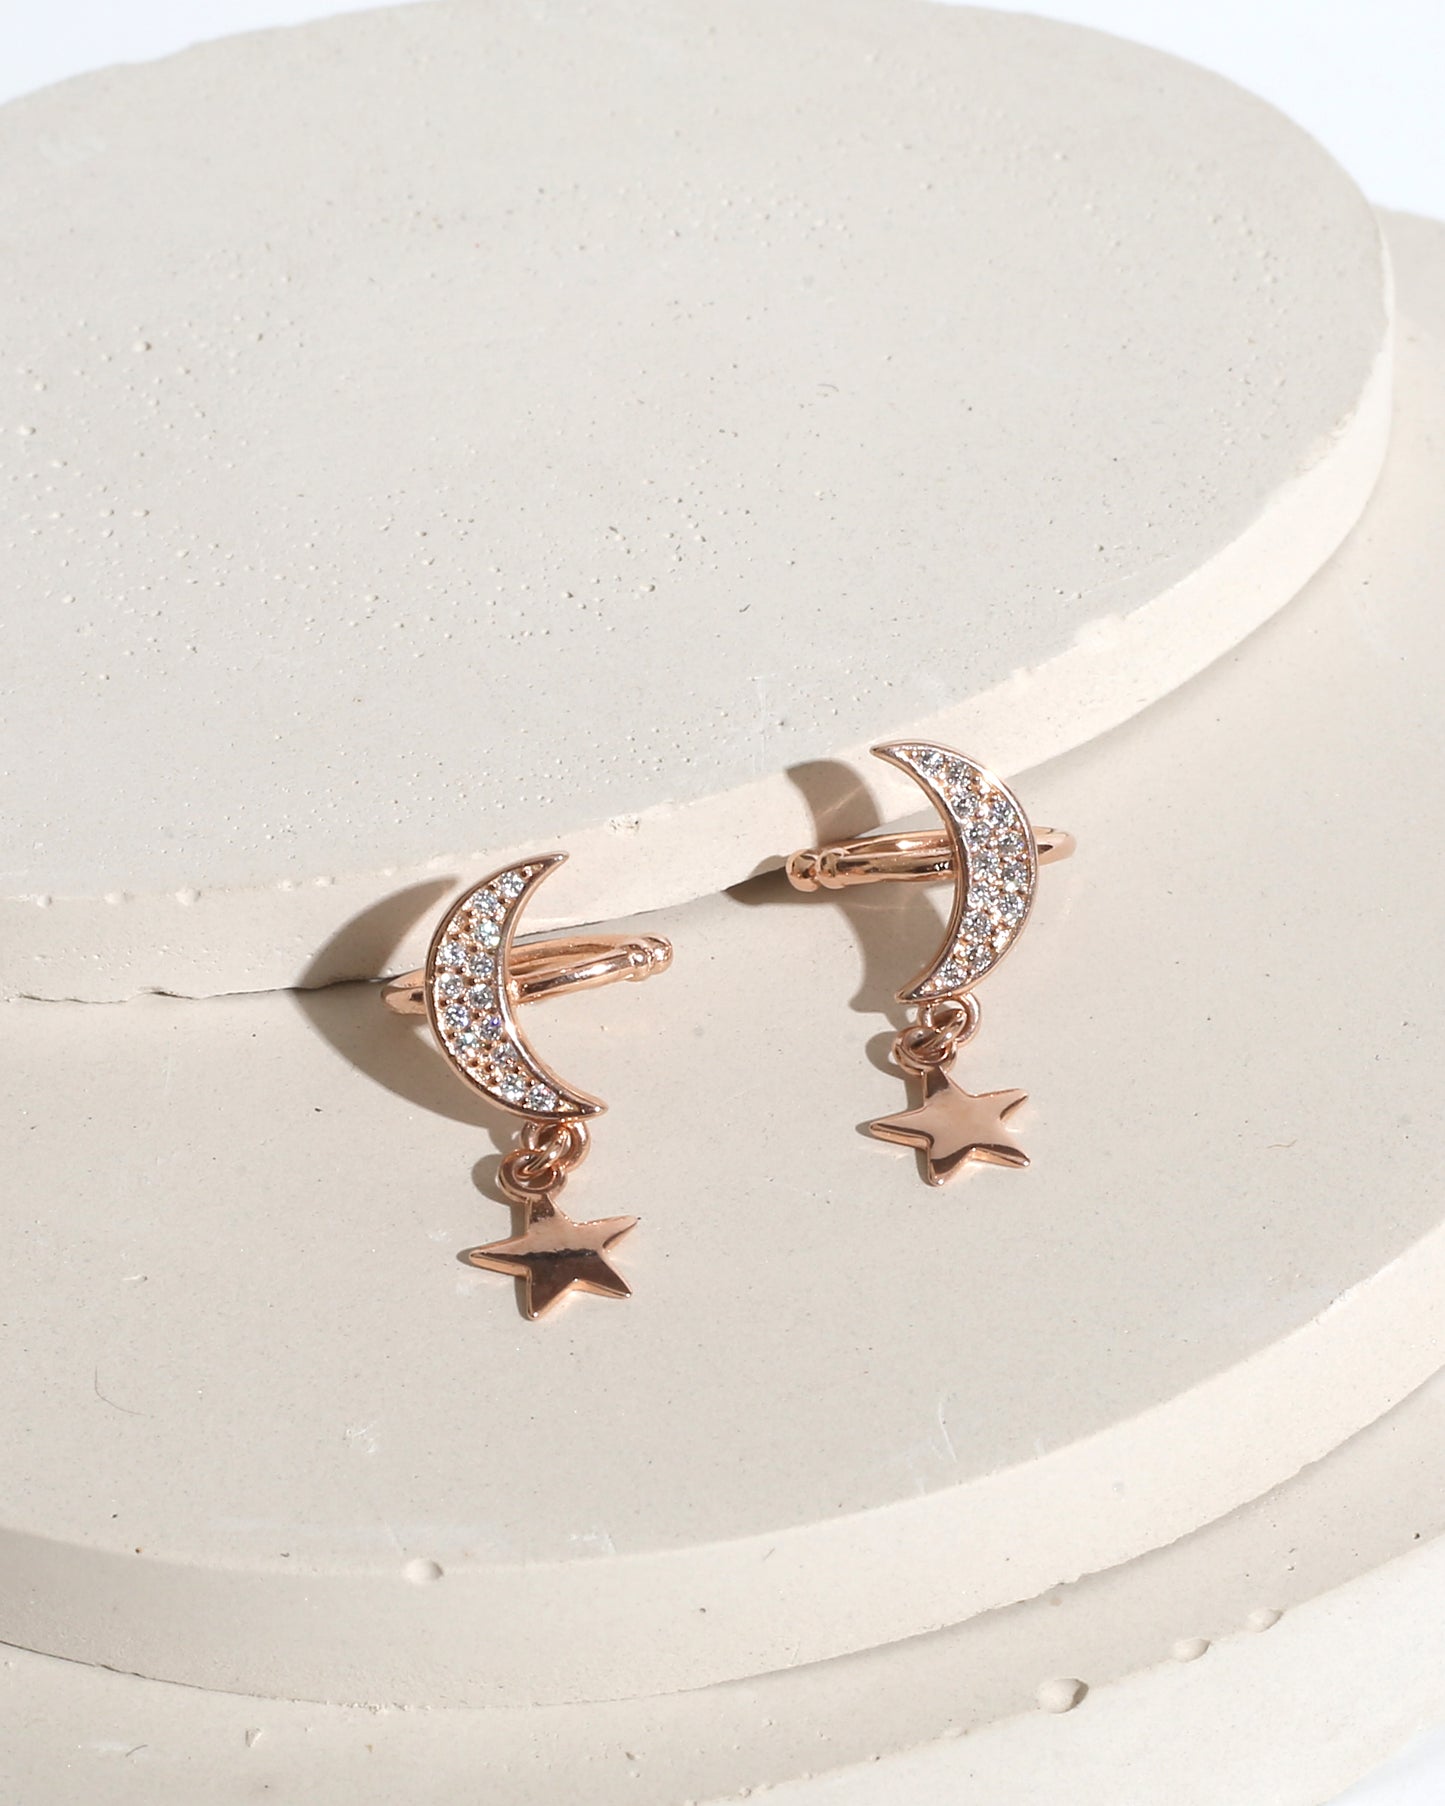 Moon and Star Shaped 925 Sterling Silver Non-Pierced Ear Cuff Earrings in captivating rose gold